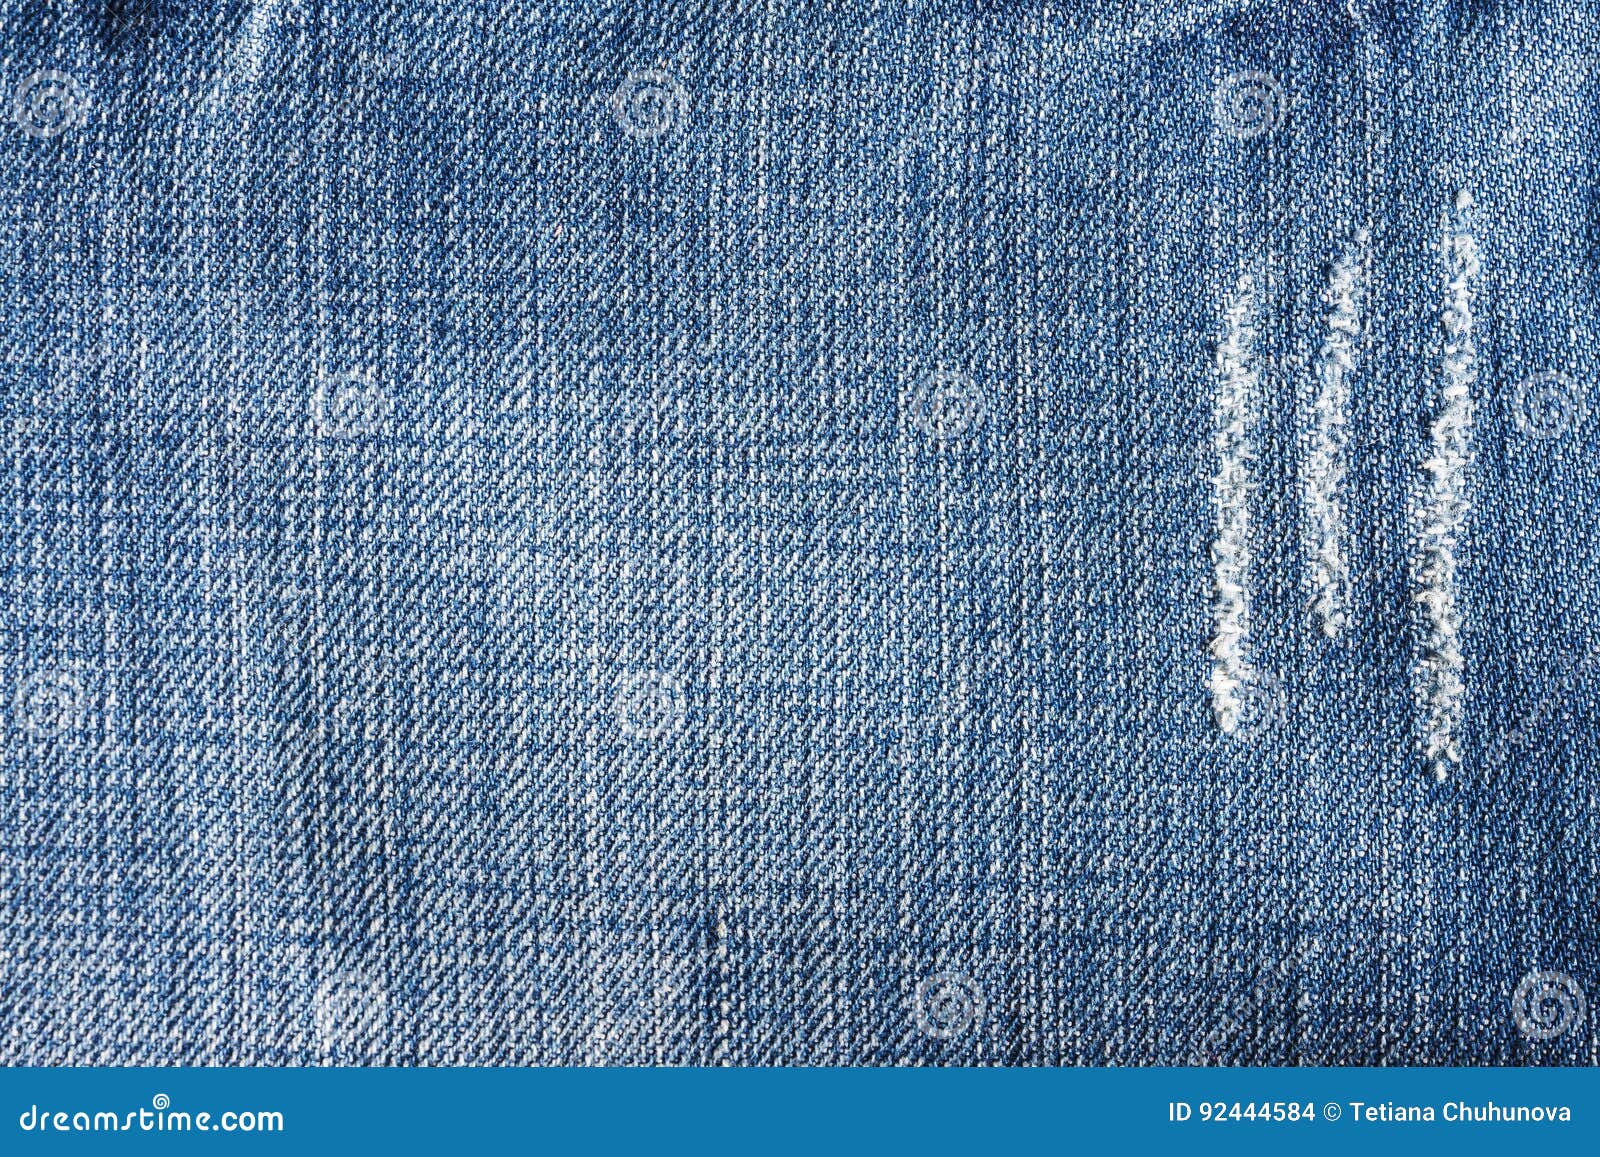 Jeans Close-up, Texture, Torn, Mopped Pieces. Stock Photo - Image of ...